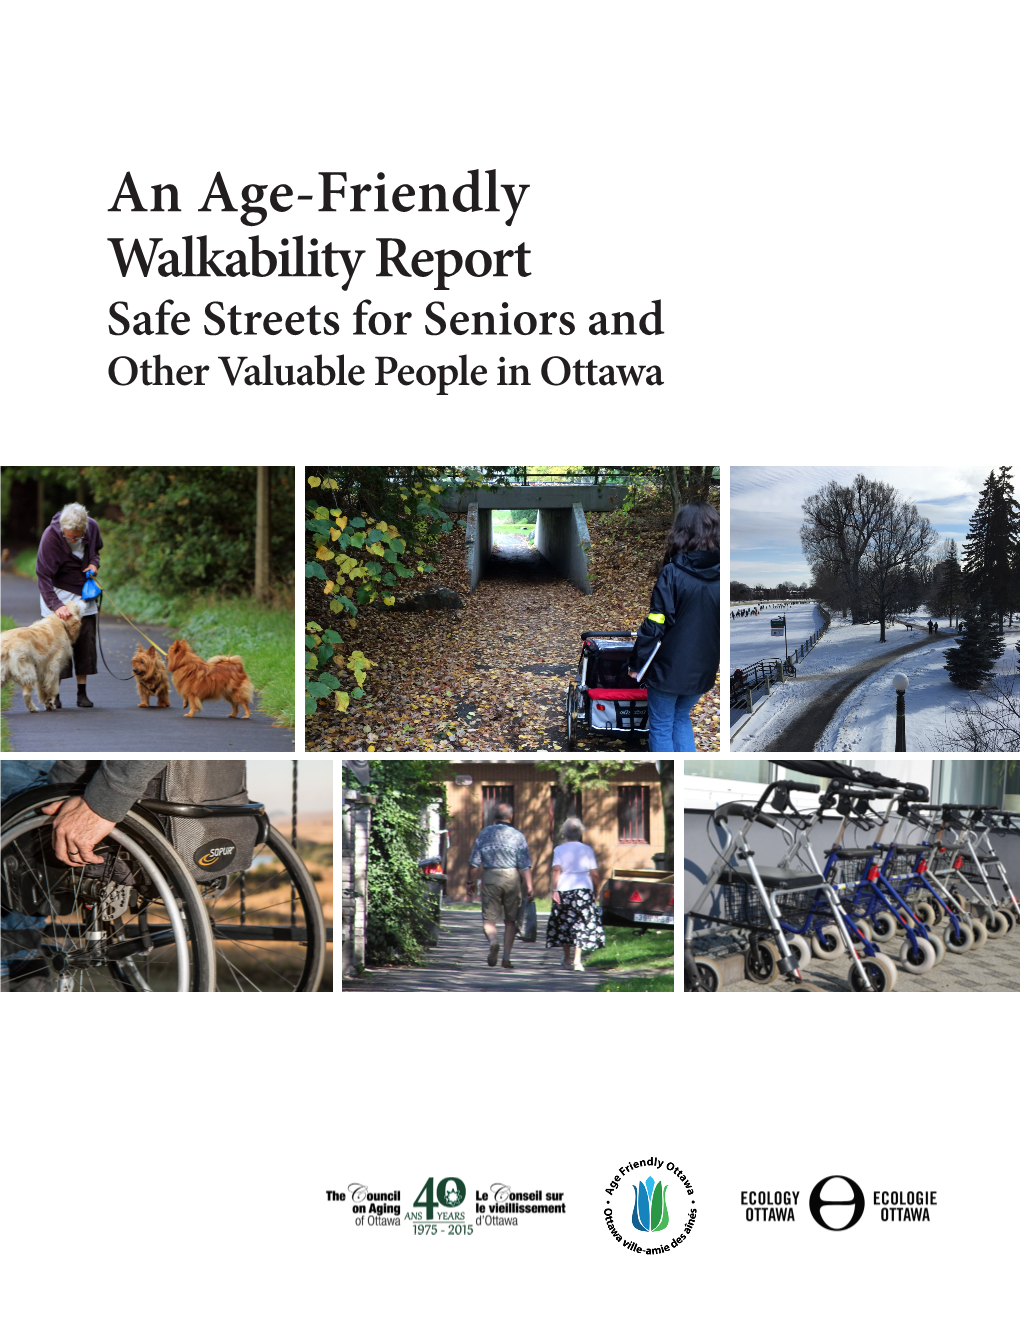 An Age-Friendly Walkability Report Safe Streets for Seniors and Other Valuable People in Ottawa Acknowledgements